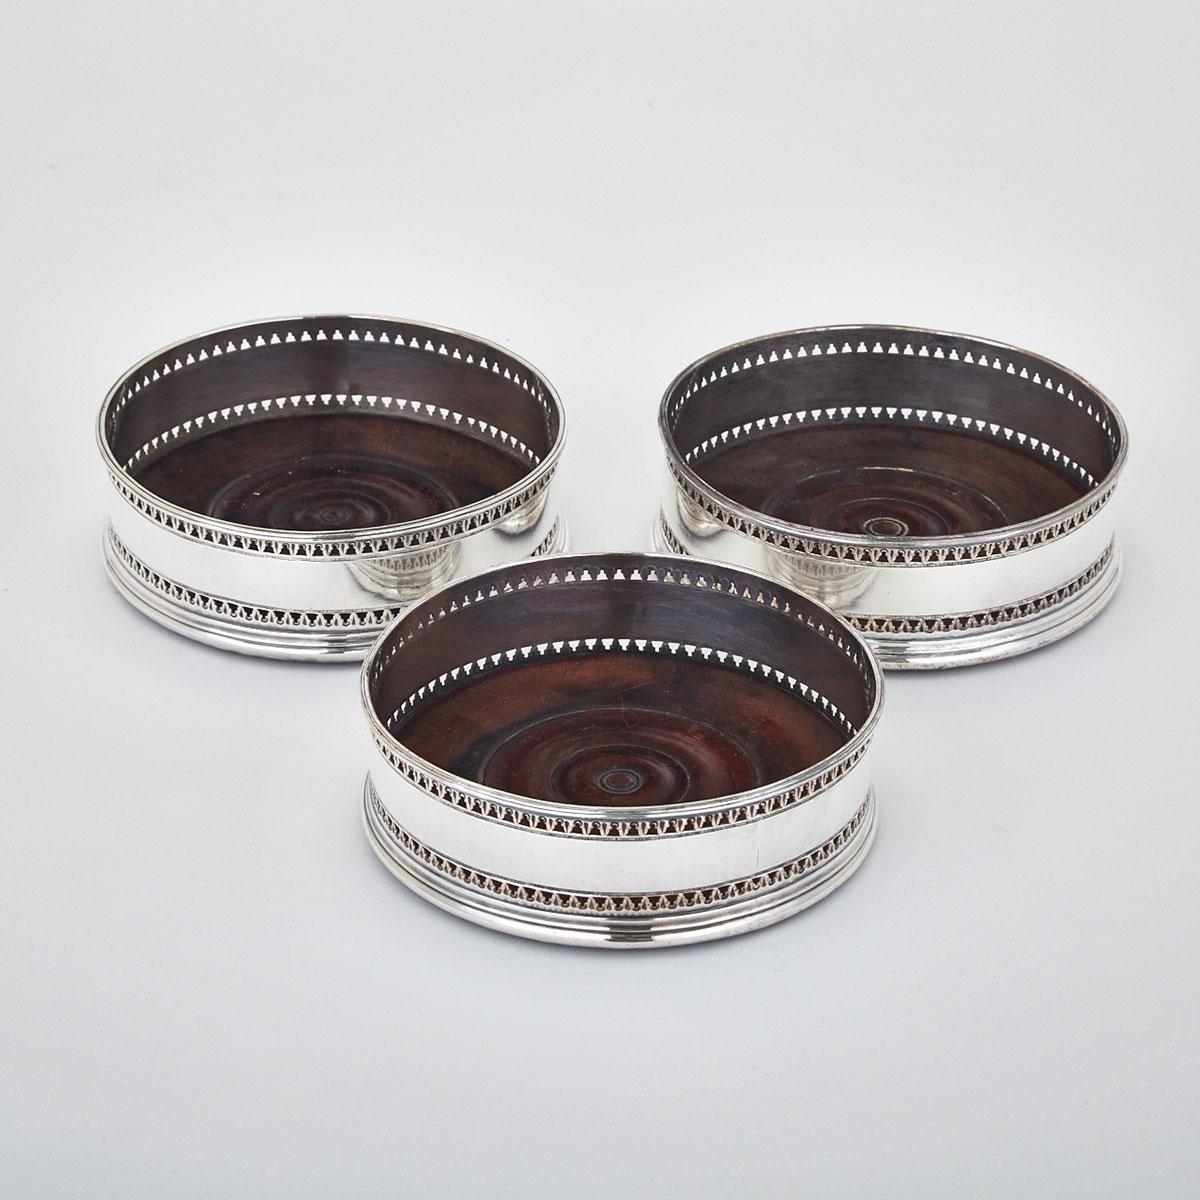 Set of Three Old Sheffield Plate Wine Coasters, late 18th century